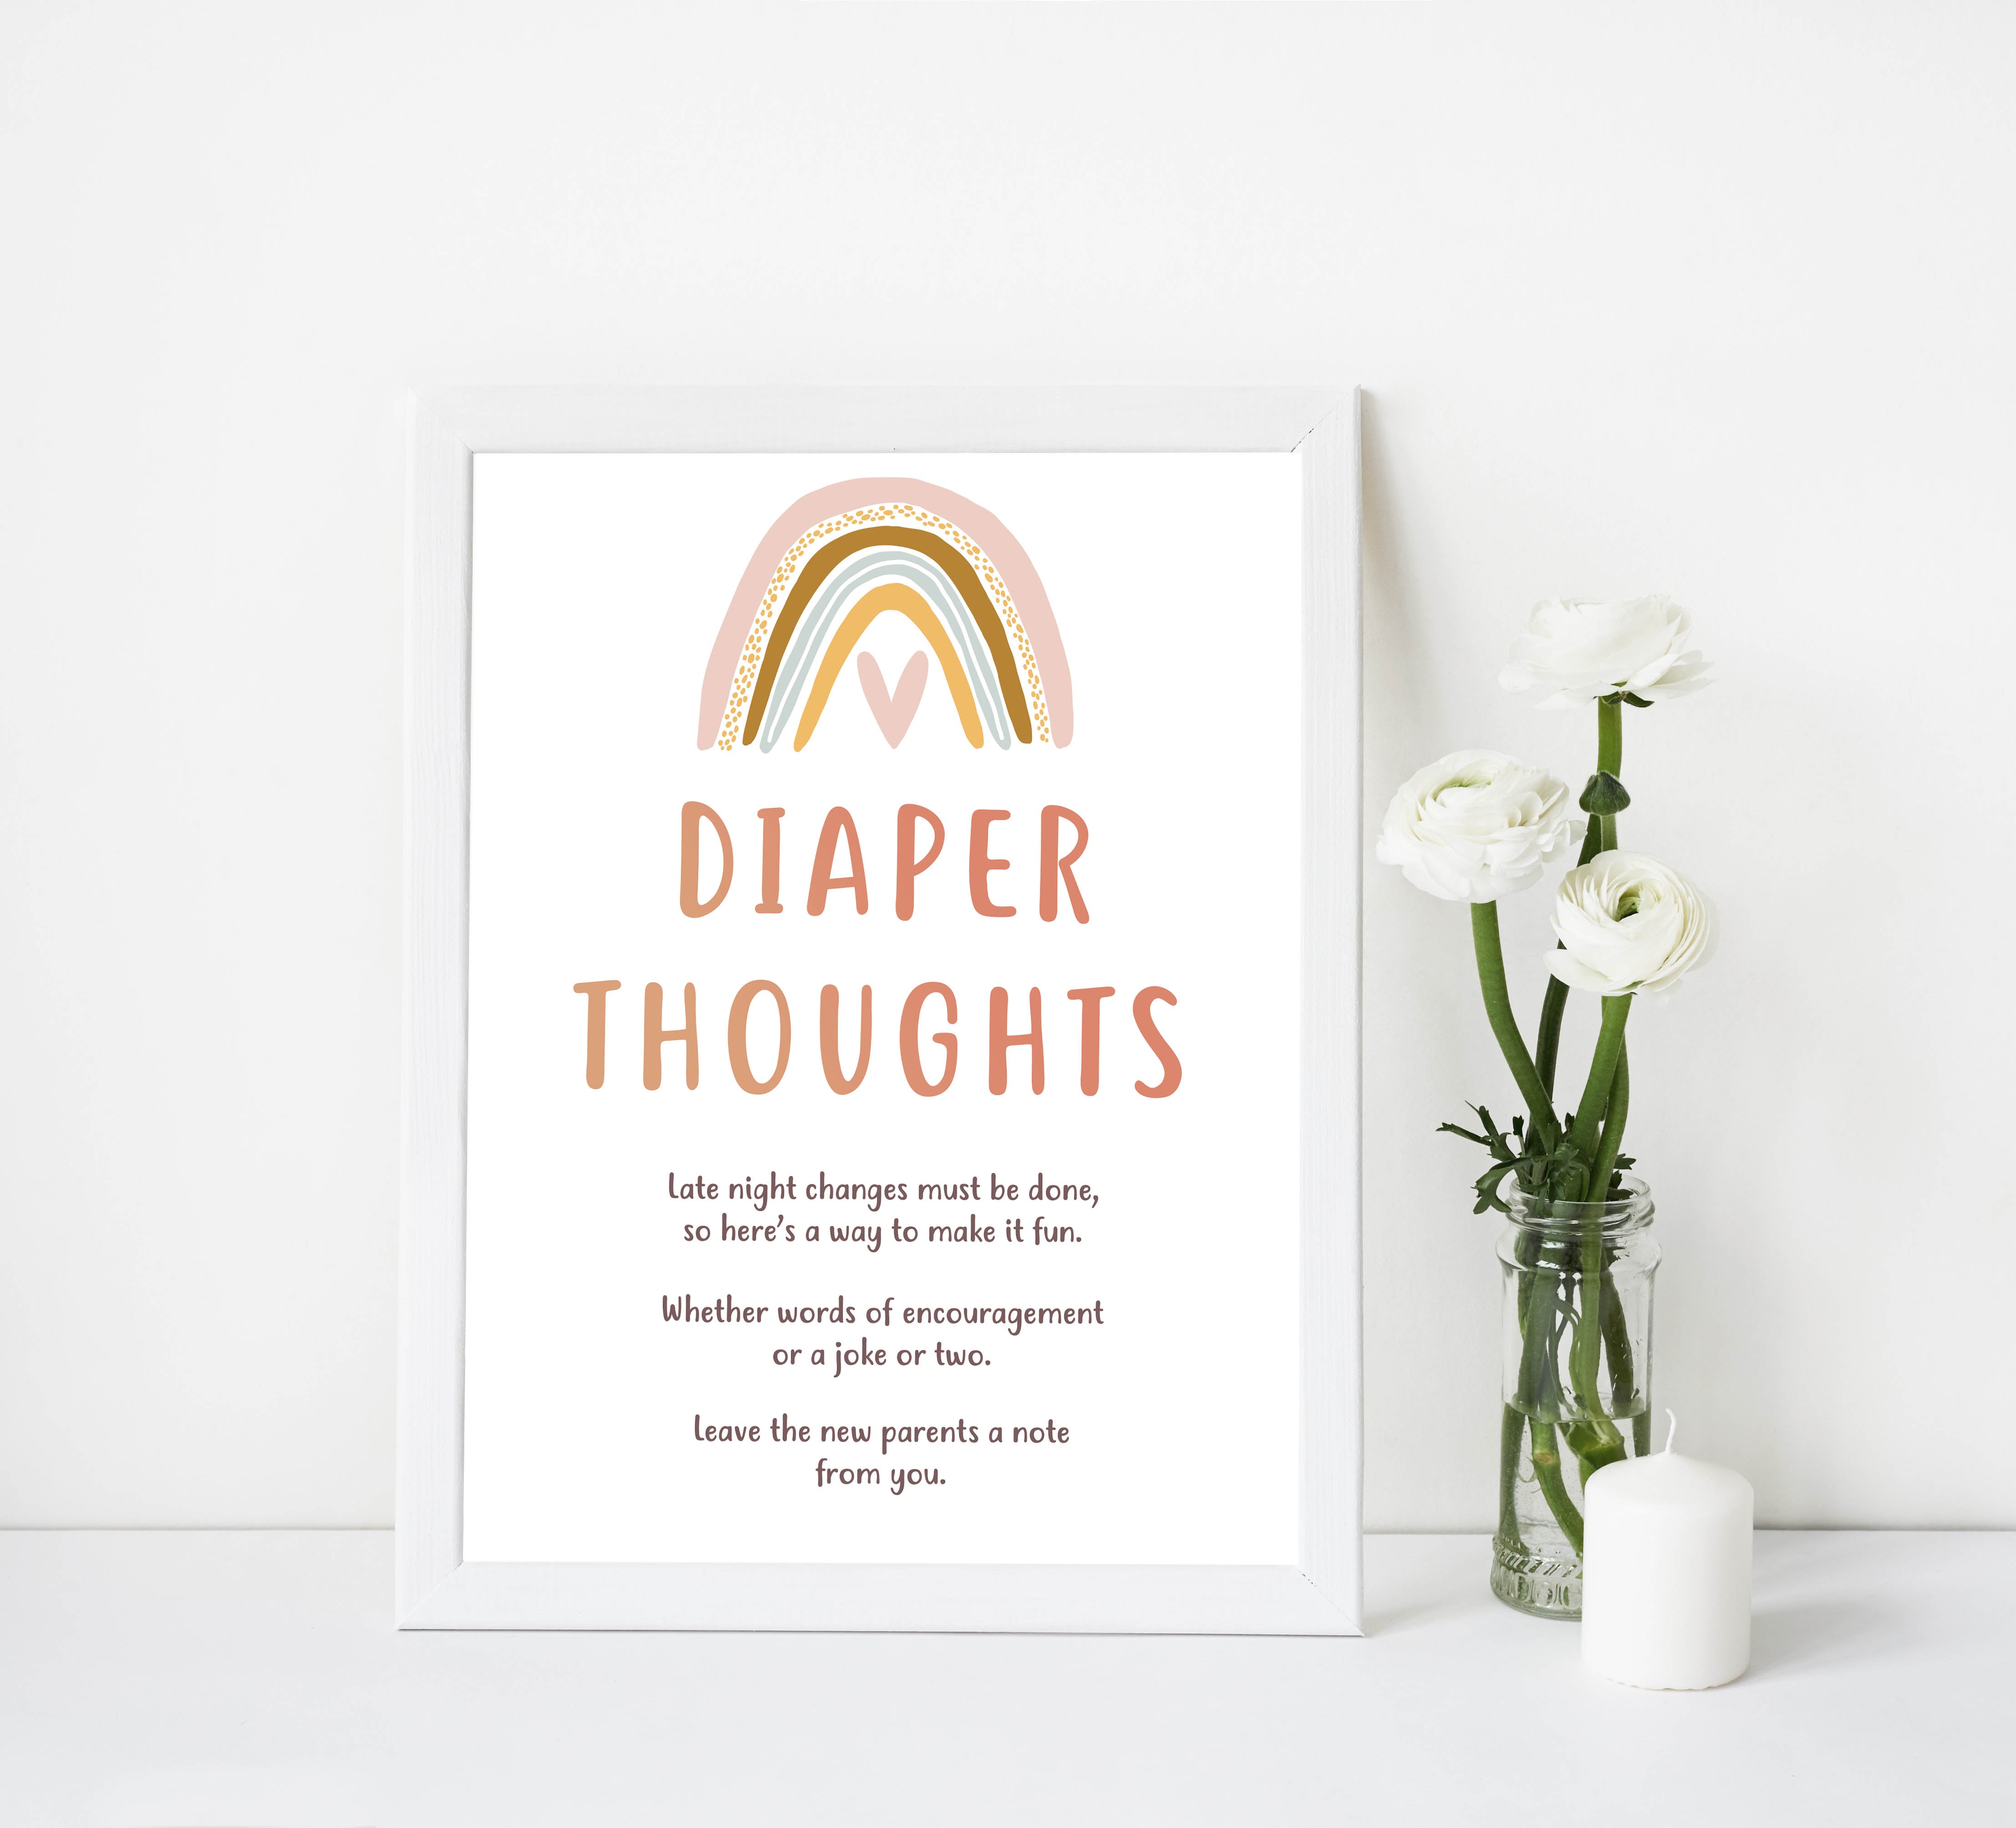 diaper thoughts game, Printable baby shower games, boho rainbow baby games, baby shower games, fun baby shower ideas, top baby shower ideas, boho rainbow baby shower, baby shower games, fun boho rainbow baby shower ideas